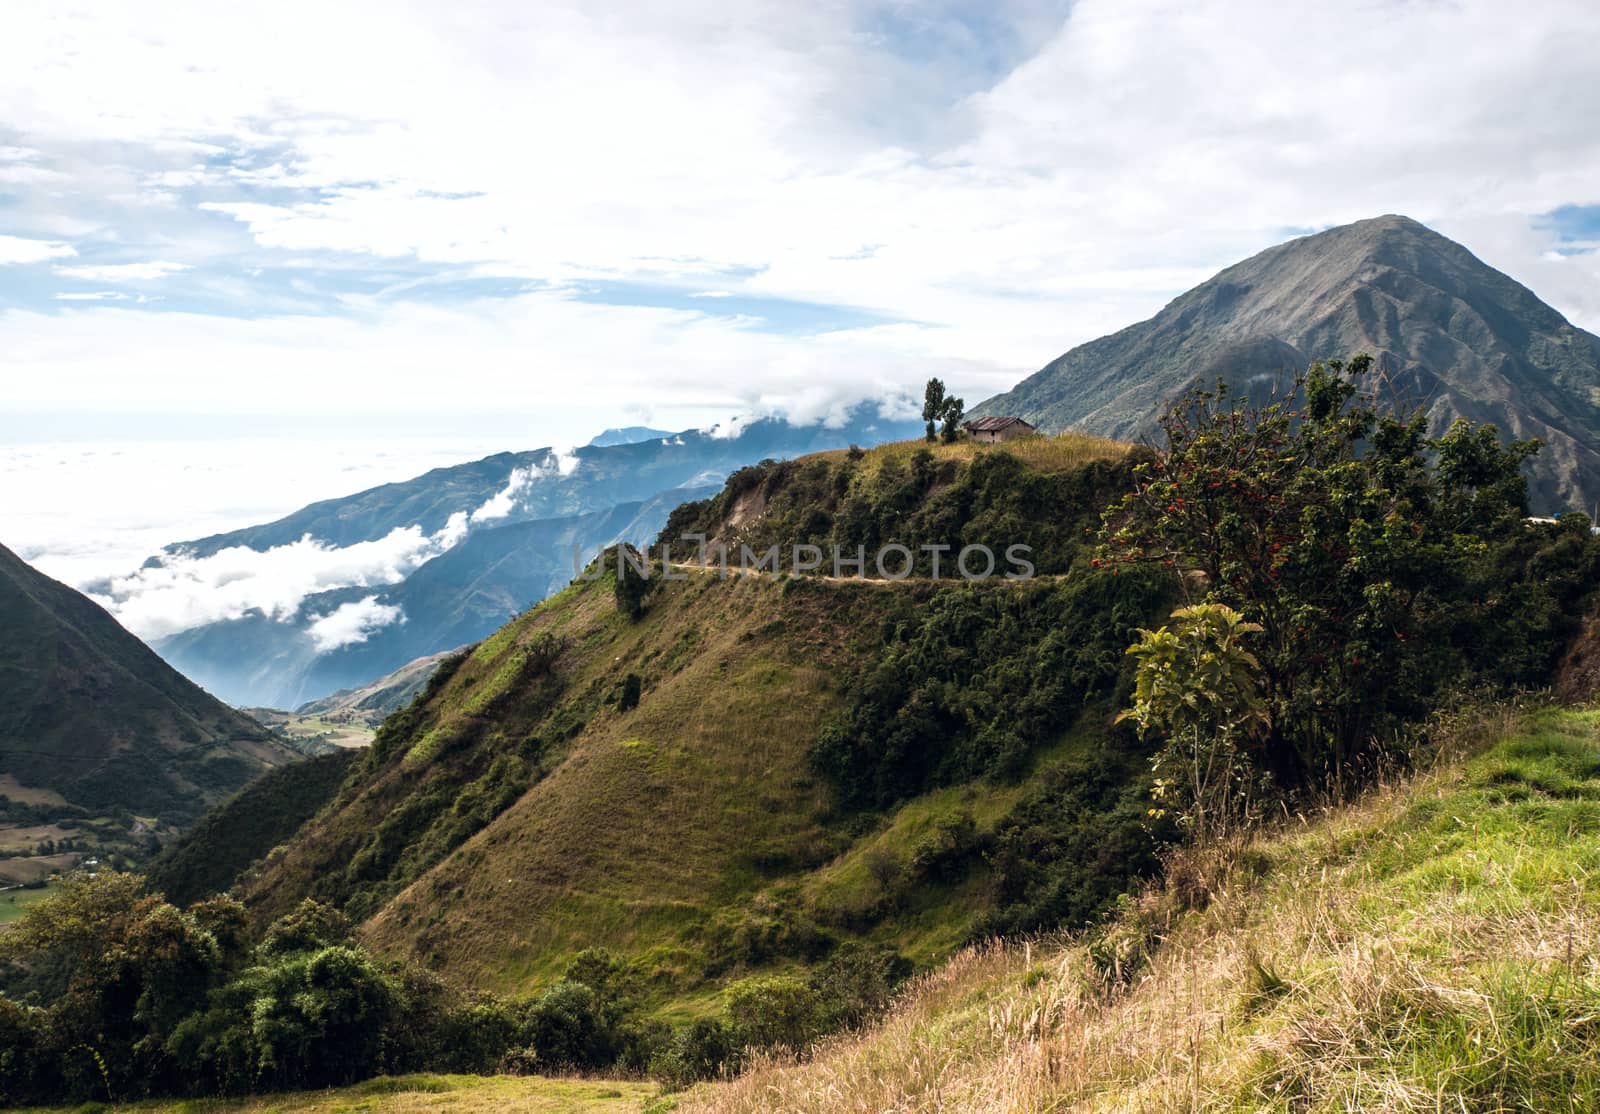 On the road through the Andes. The photo is taken near small town Alausi in Ecuador